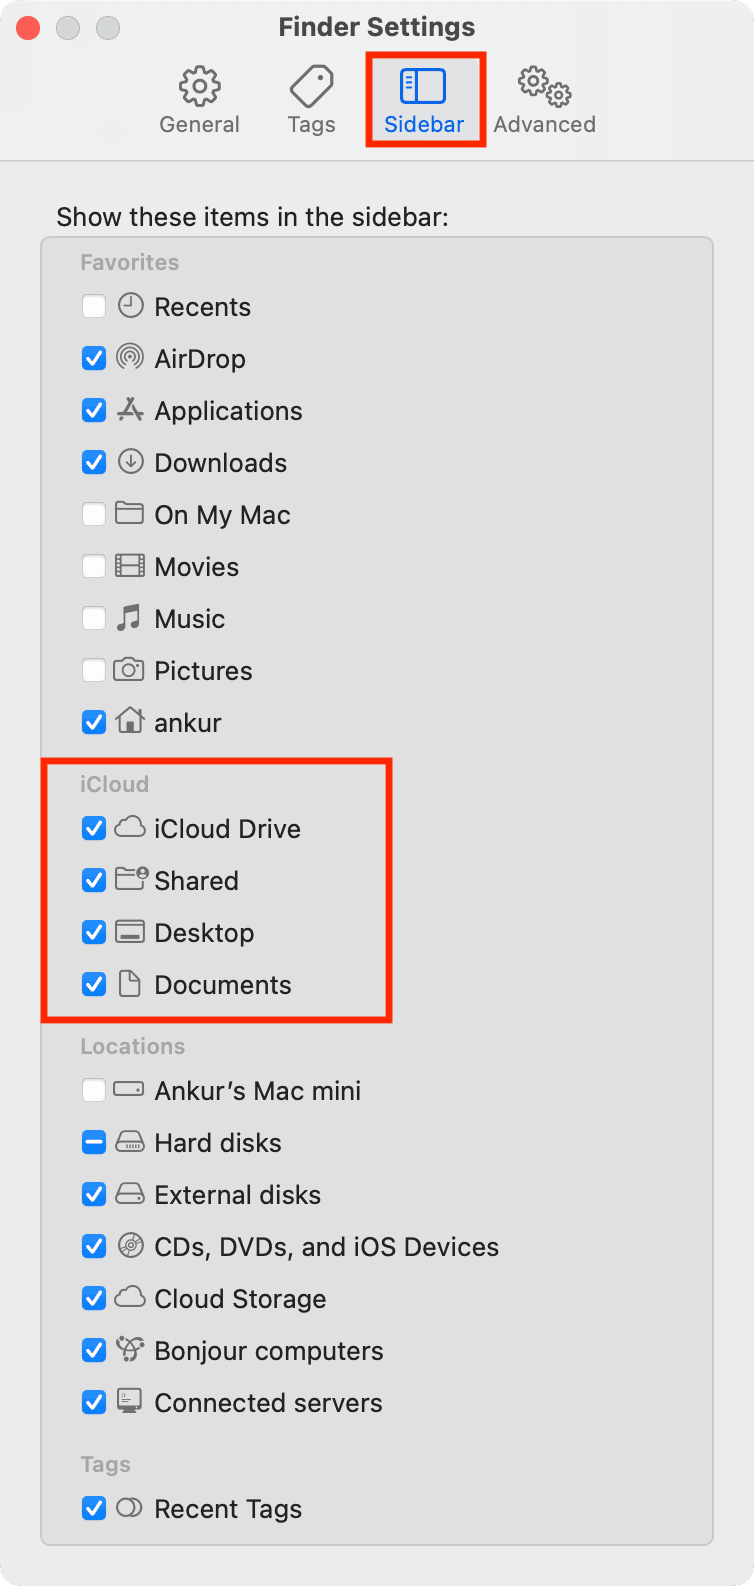 Show iCloud Drive, Desktop, and Documents in Finder Sidebar